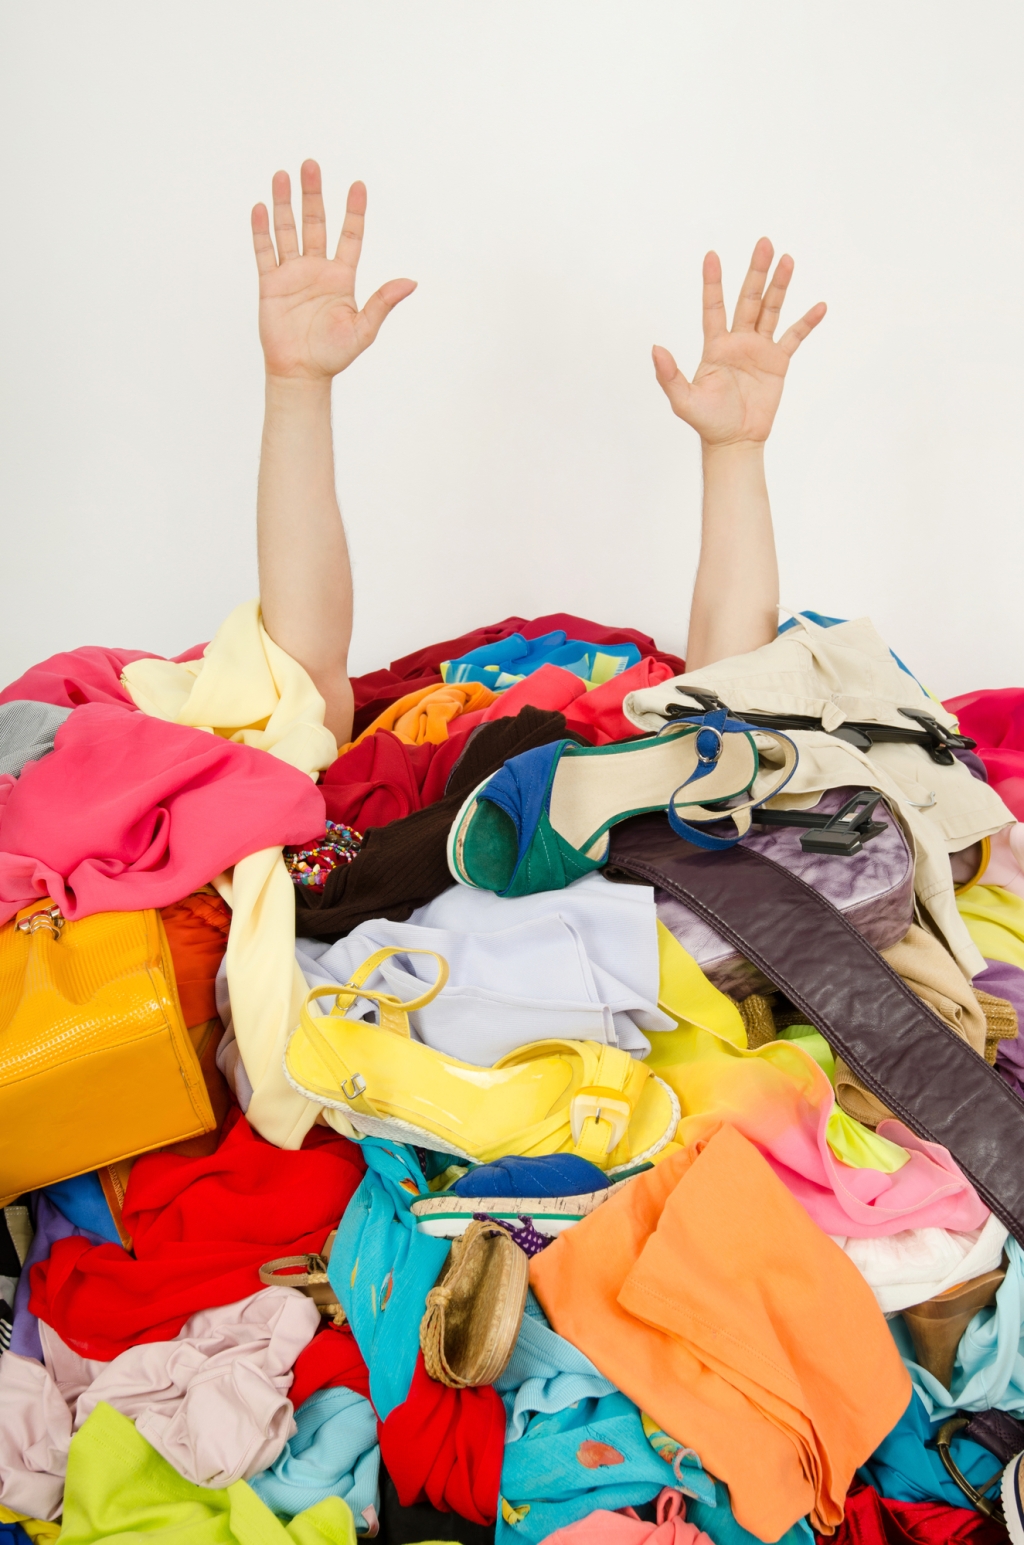 What Marie Kondo Can Teach Us About Managing Digital Assets